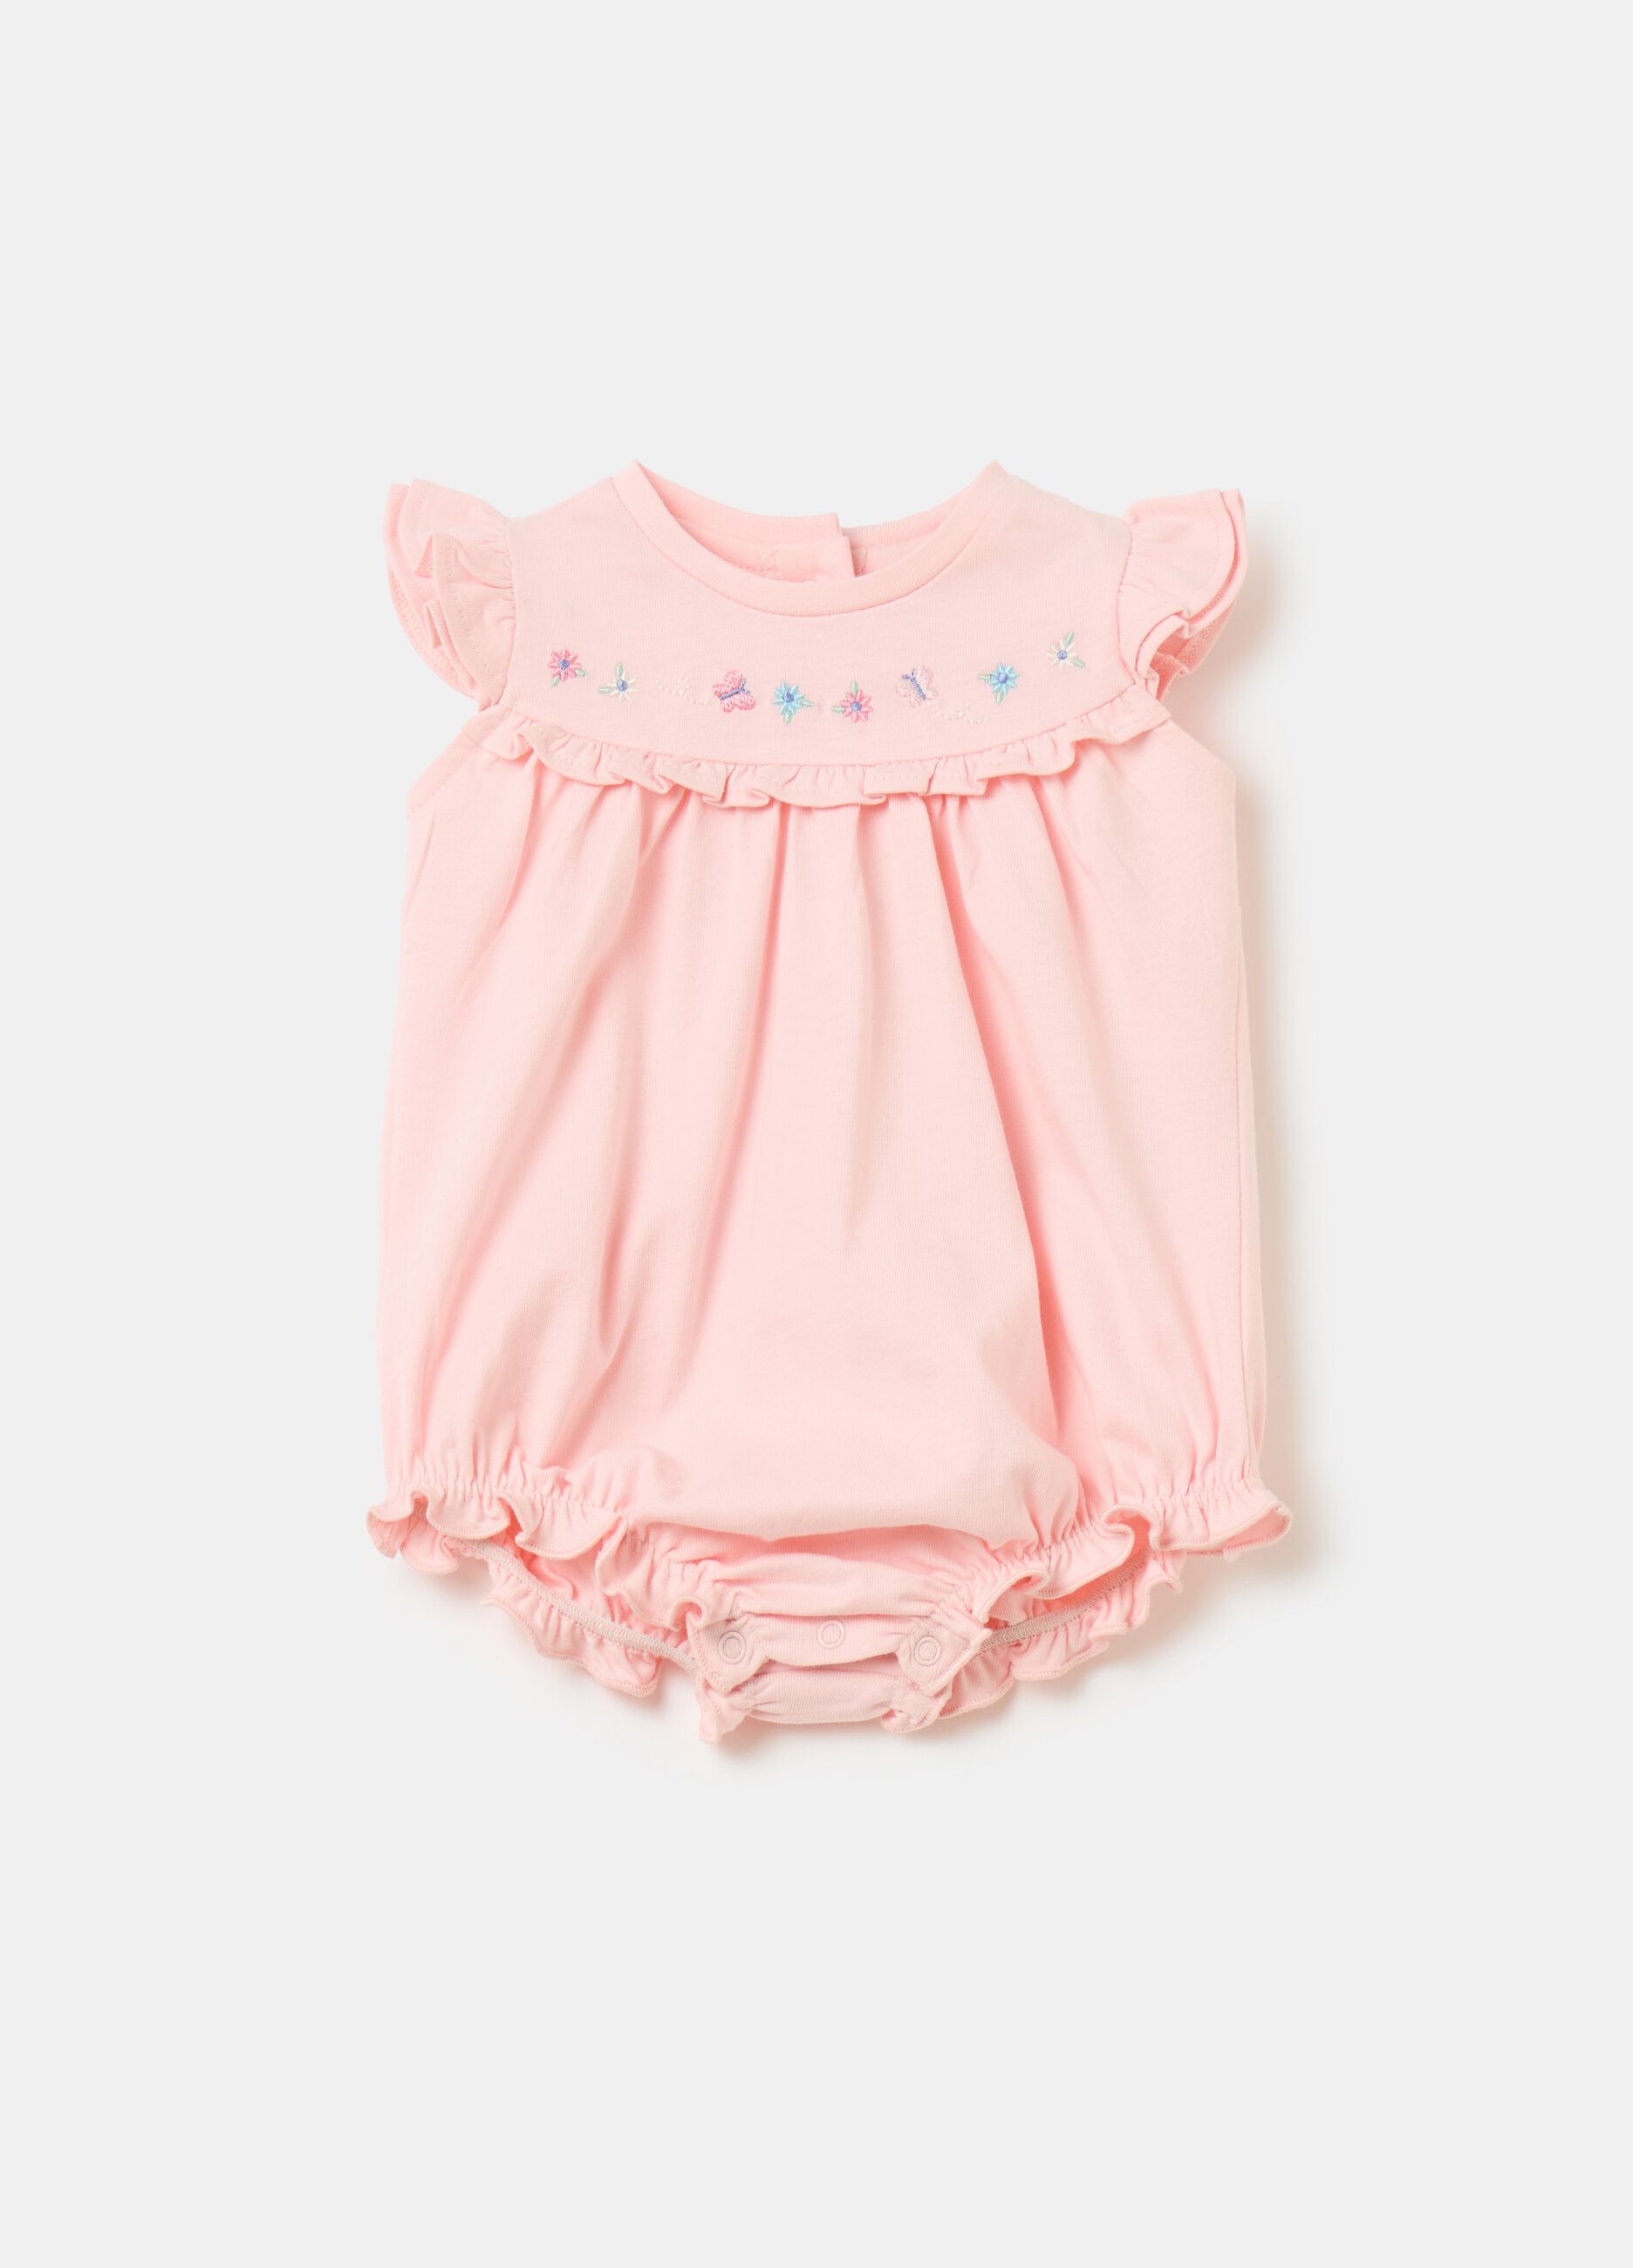 Organic cotton romper suit with embroidery